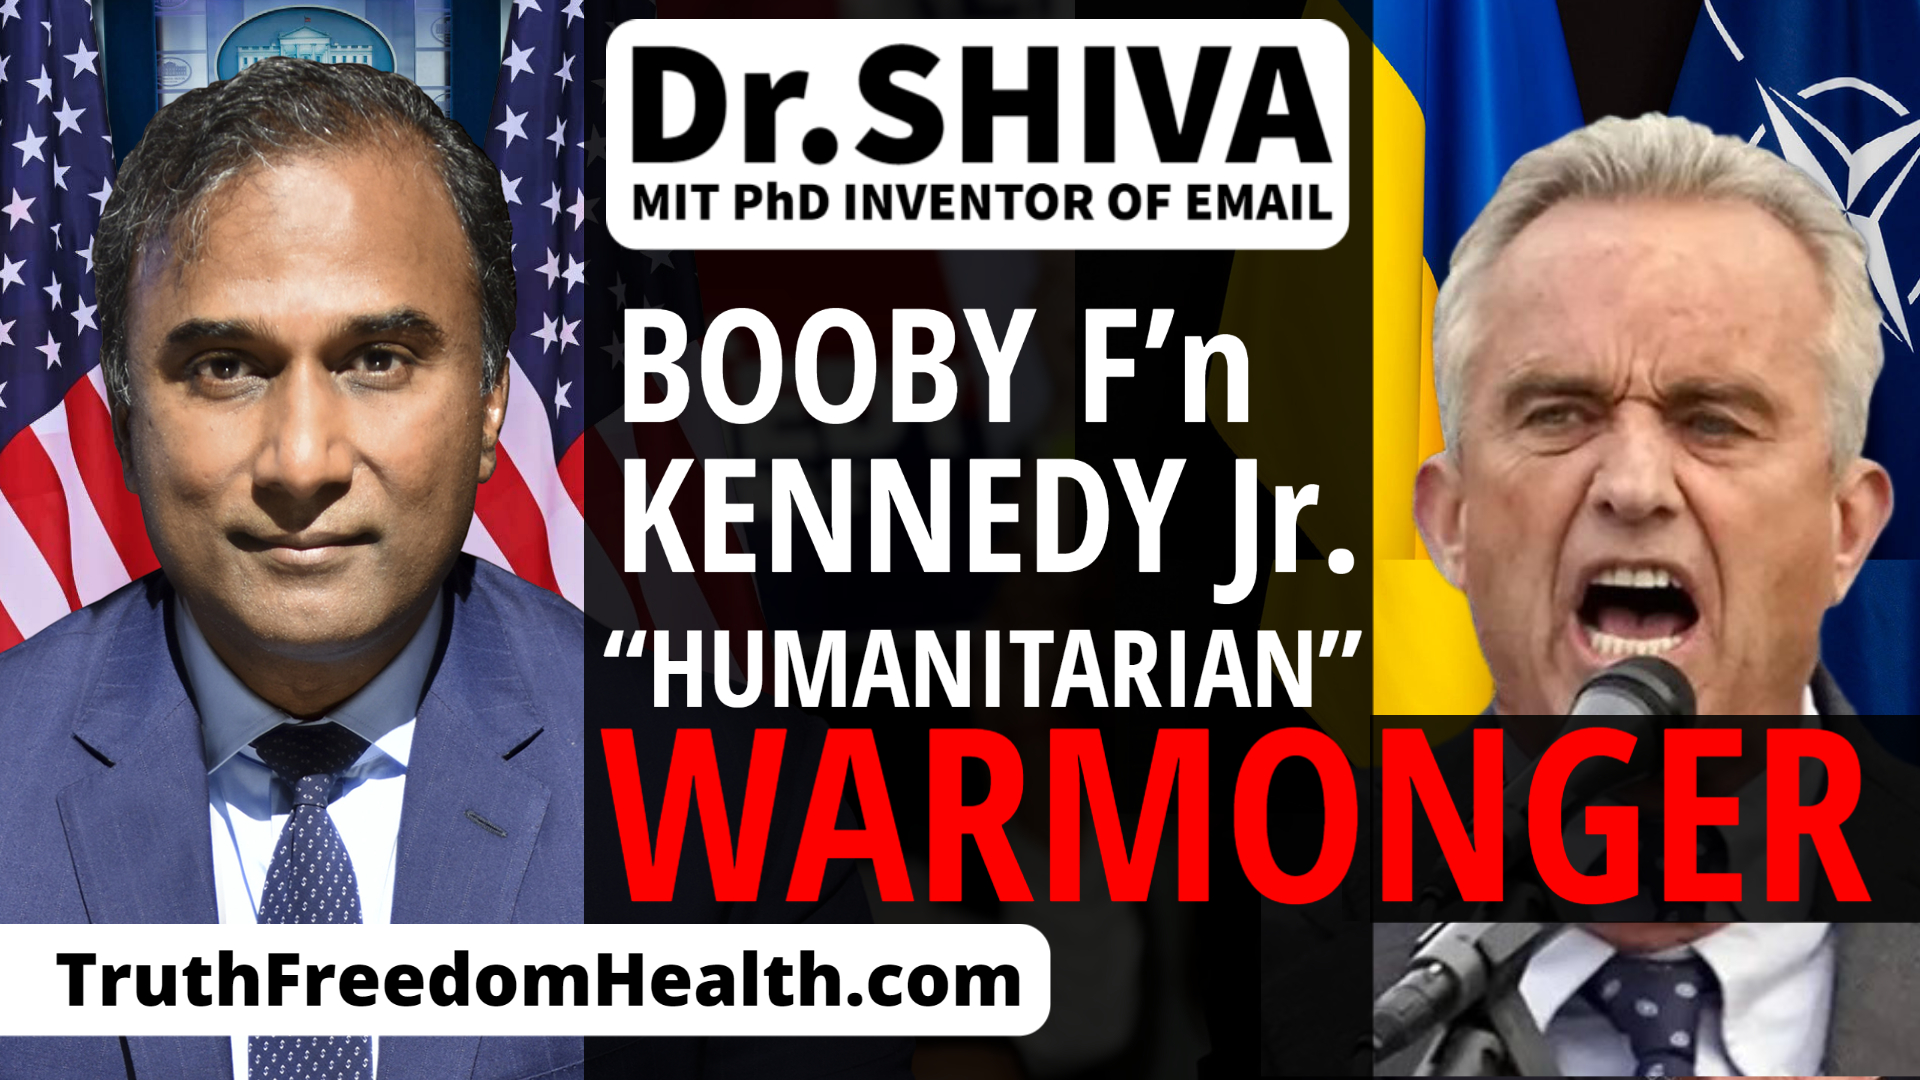 Dr.SHIVA™ LIVE: The “Humanitarian Warmonger - Booby F’n Kennedy, Jr. - The Other Face of Imperialism